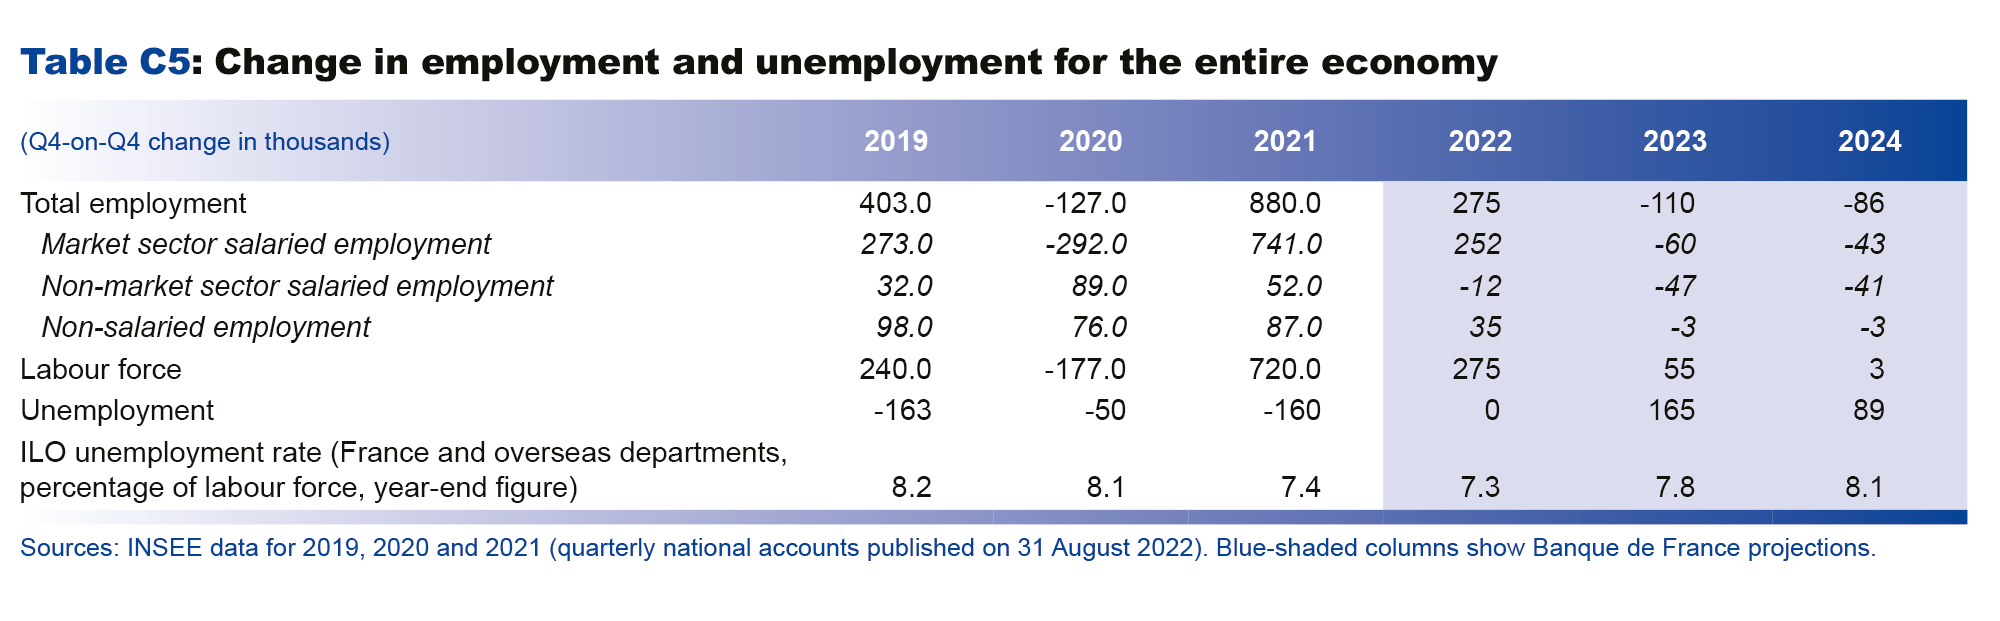 Macroeconomic projections – September 2022 - Change in employment and unempoyment for the entire economy